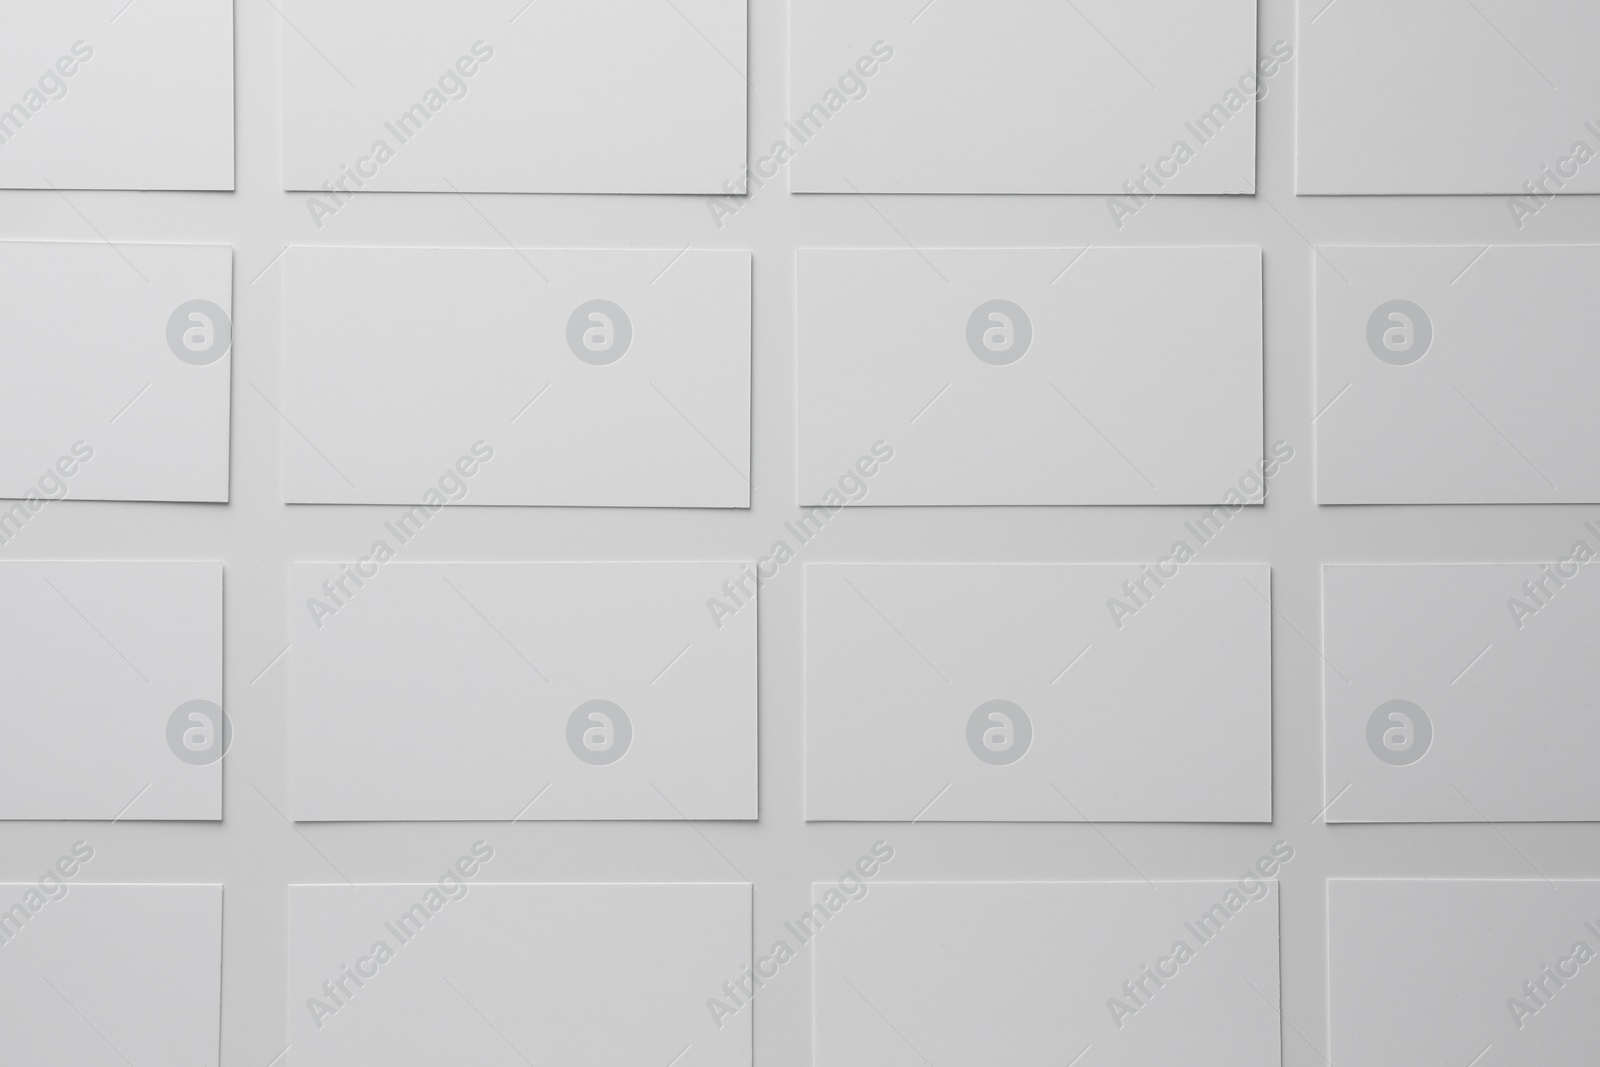 Photo of Blank business cards on white background, flat lay. Mockup for design